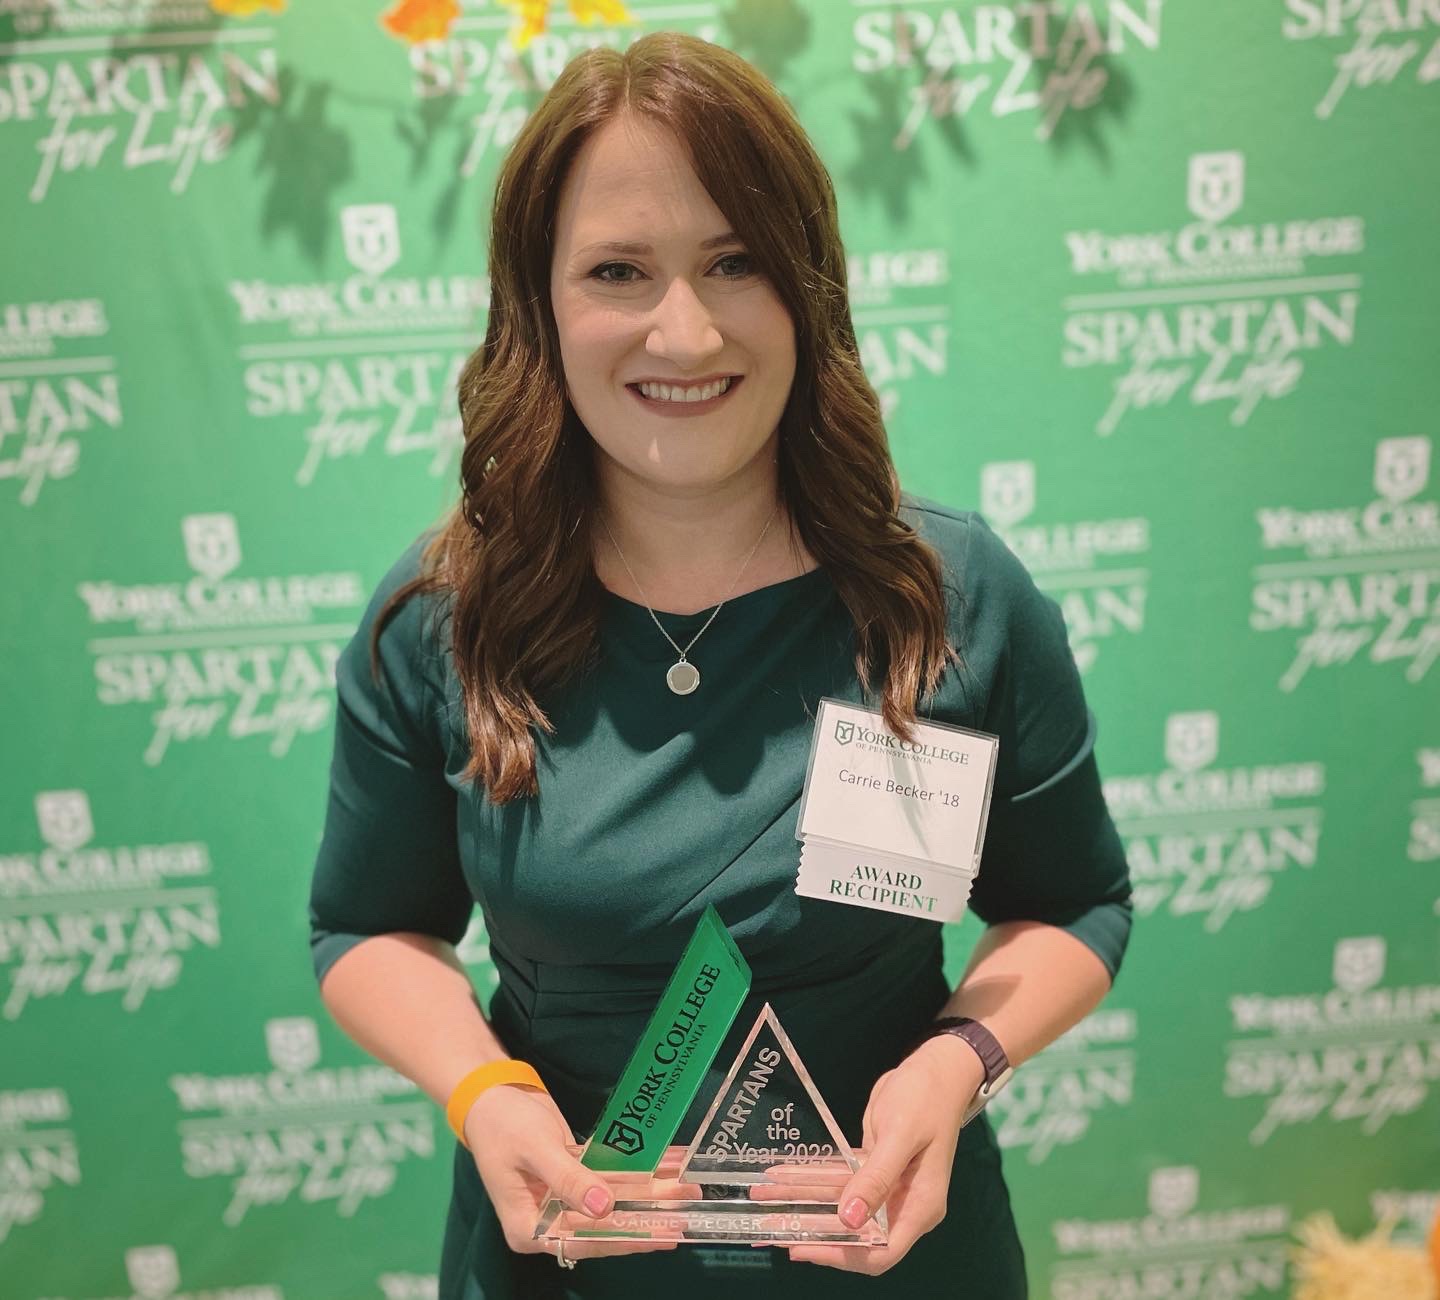 Carrie Becker Honored as York College Spartan of the Year